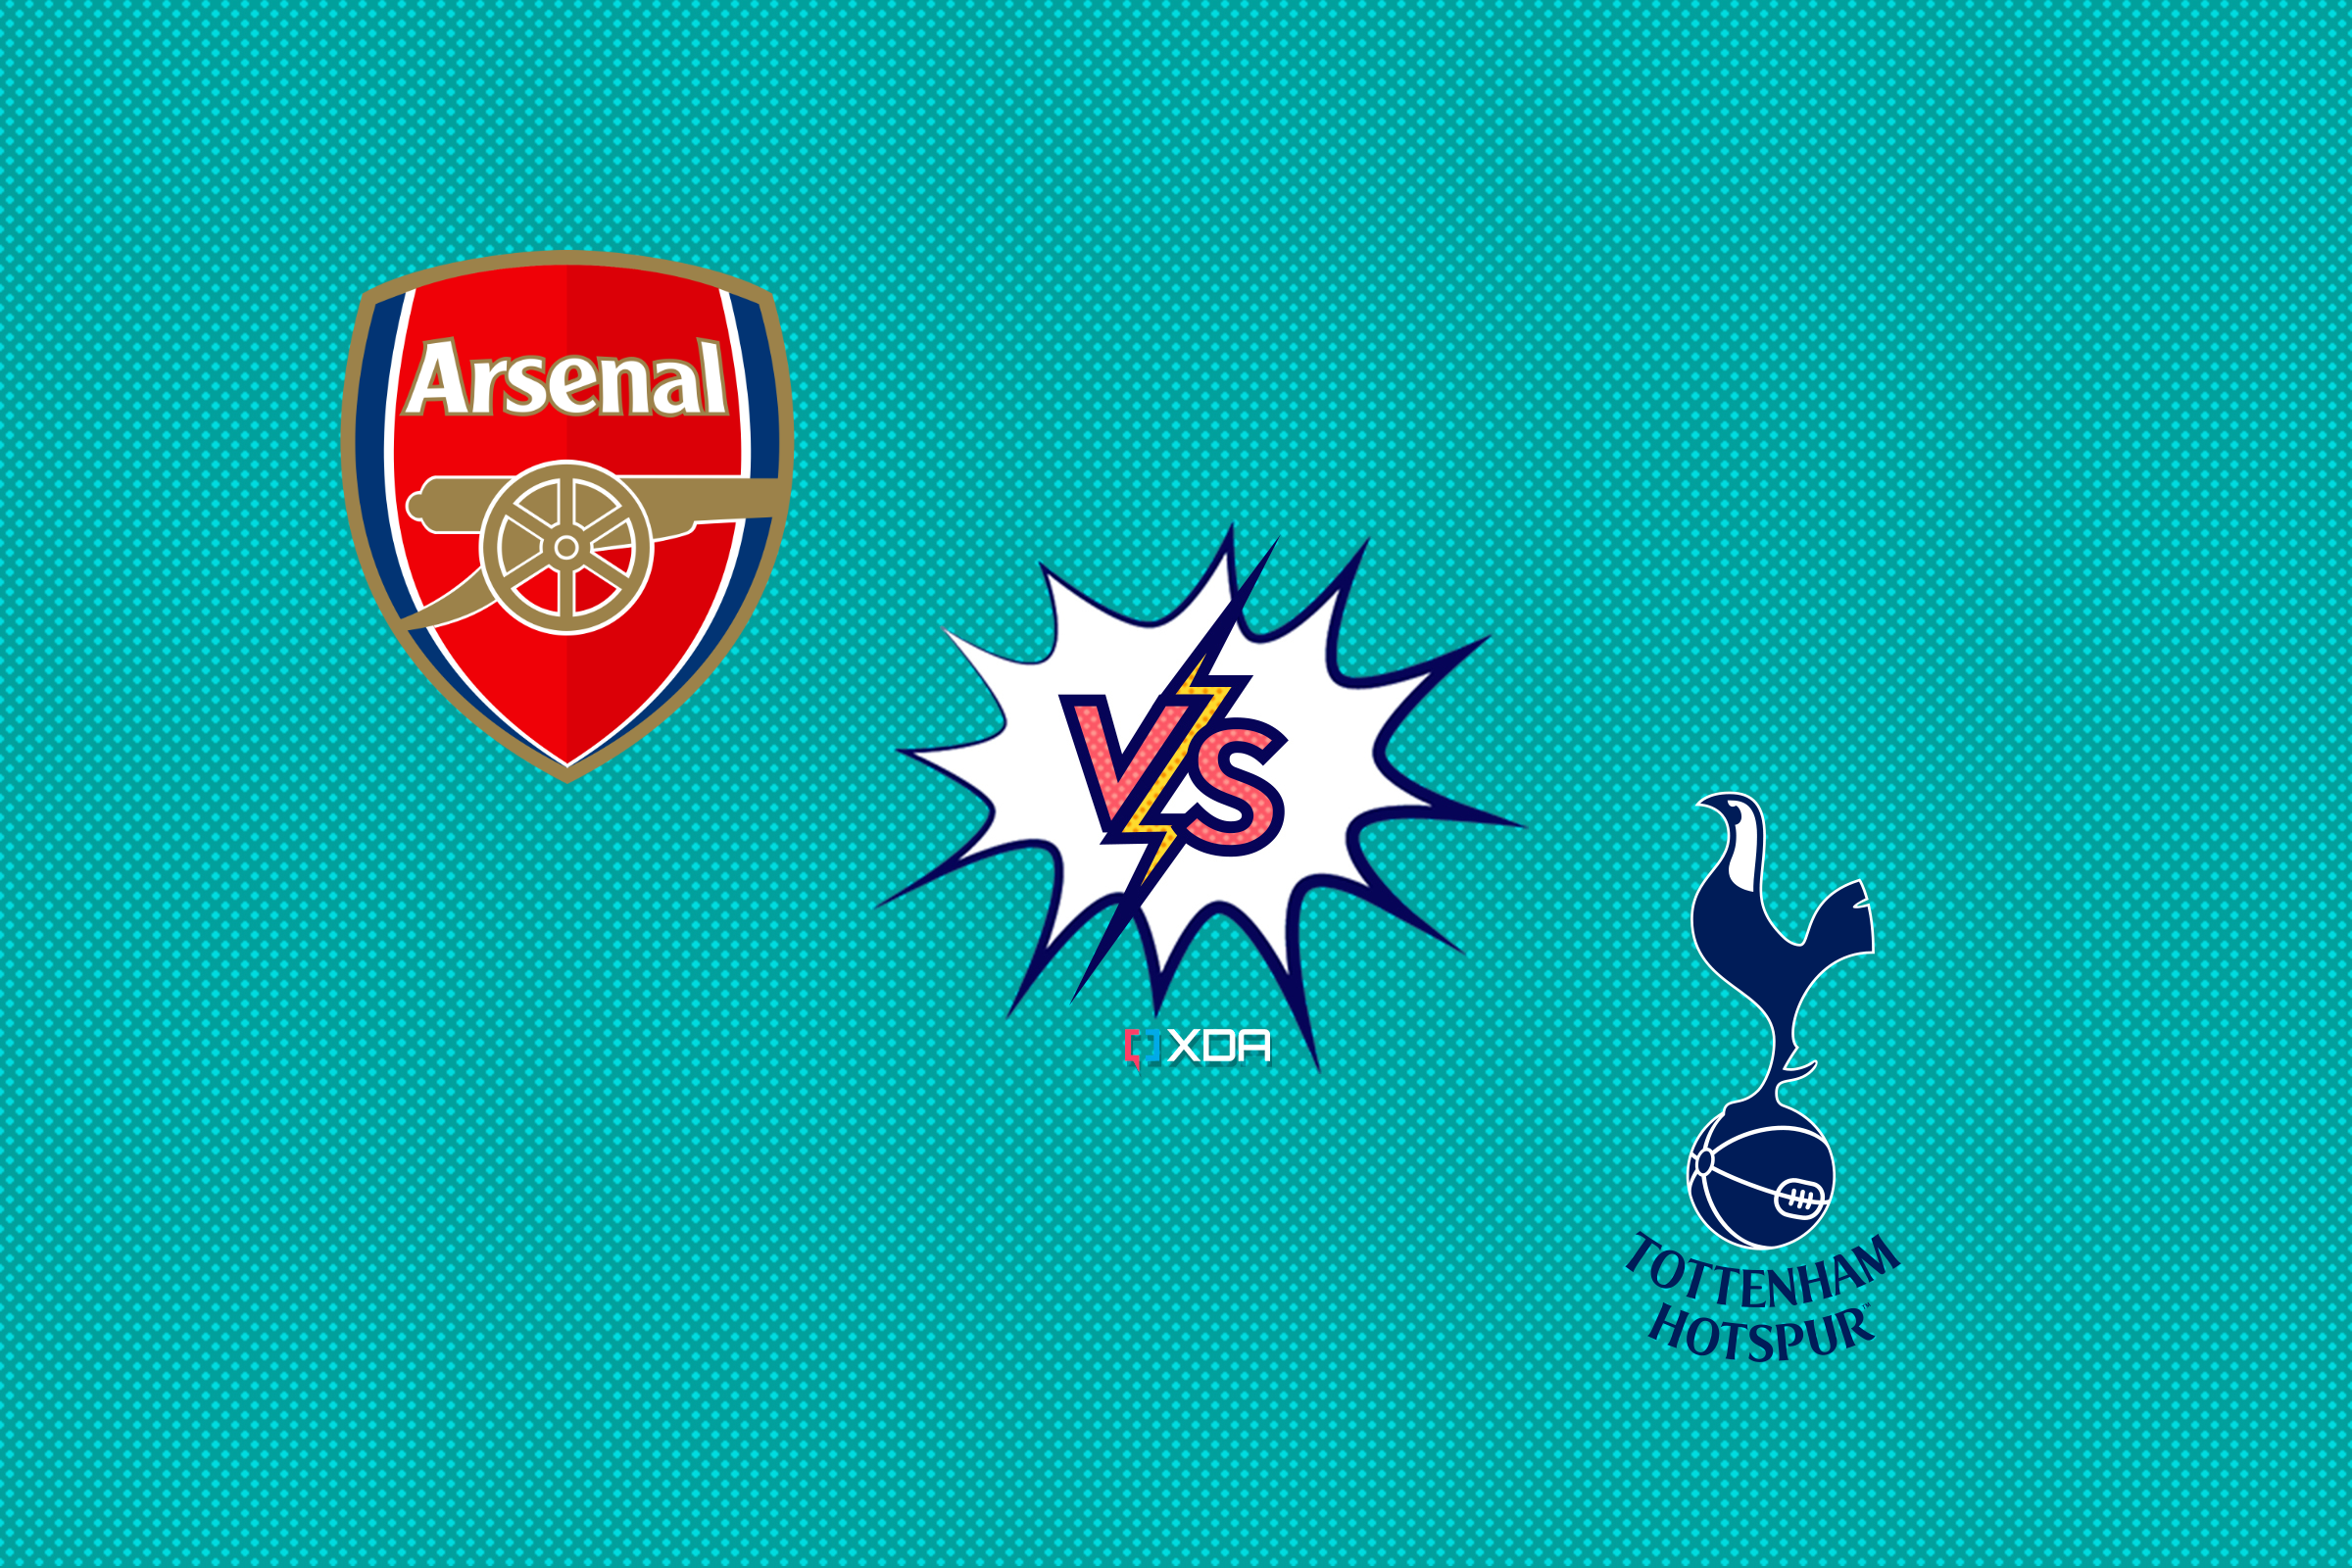 Arsenal vs Tottenham live stream Kick off time and how to watch